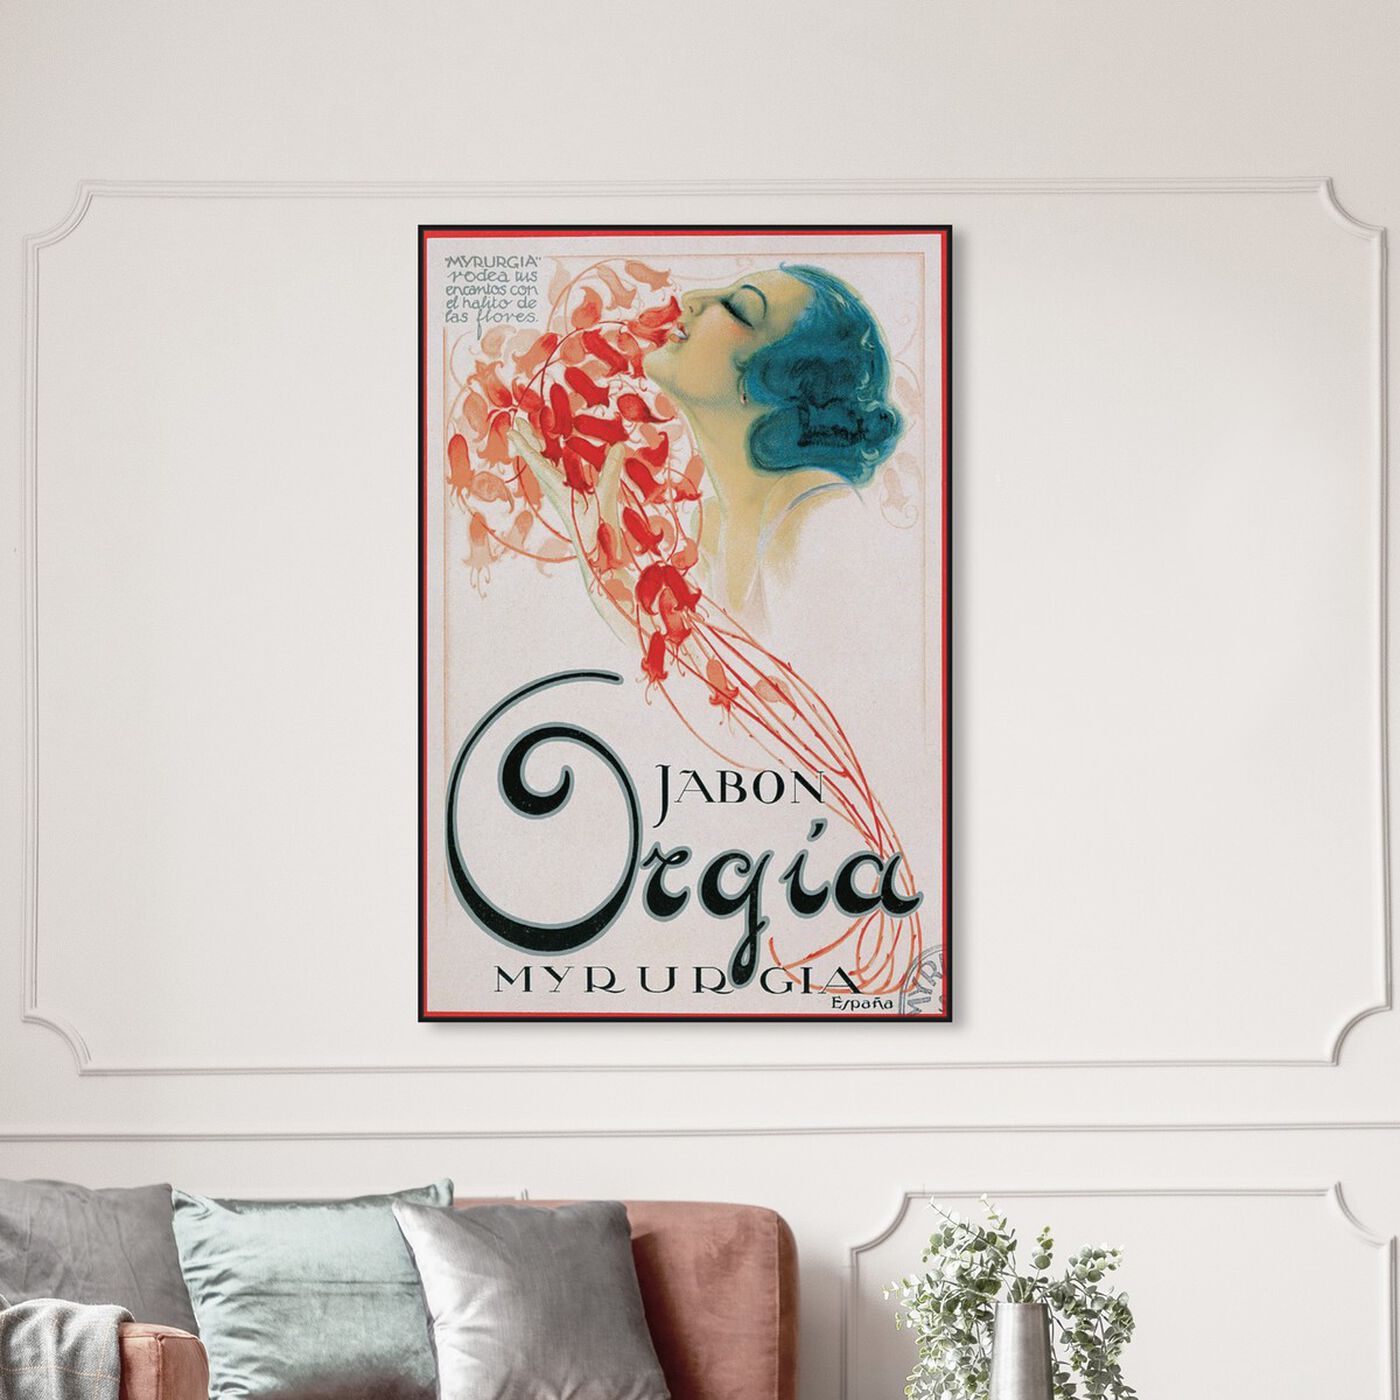 Hanging view of Orgia Vintage Soap Ad featuring advertising and posters art.